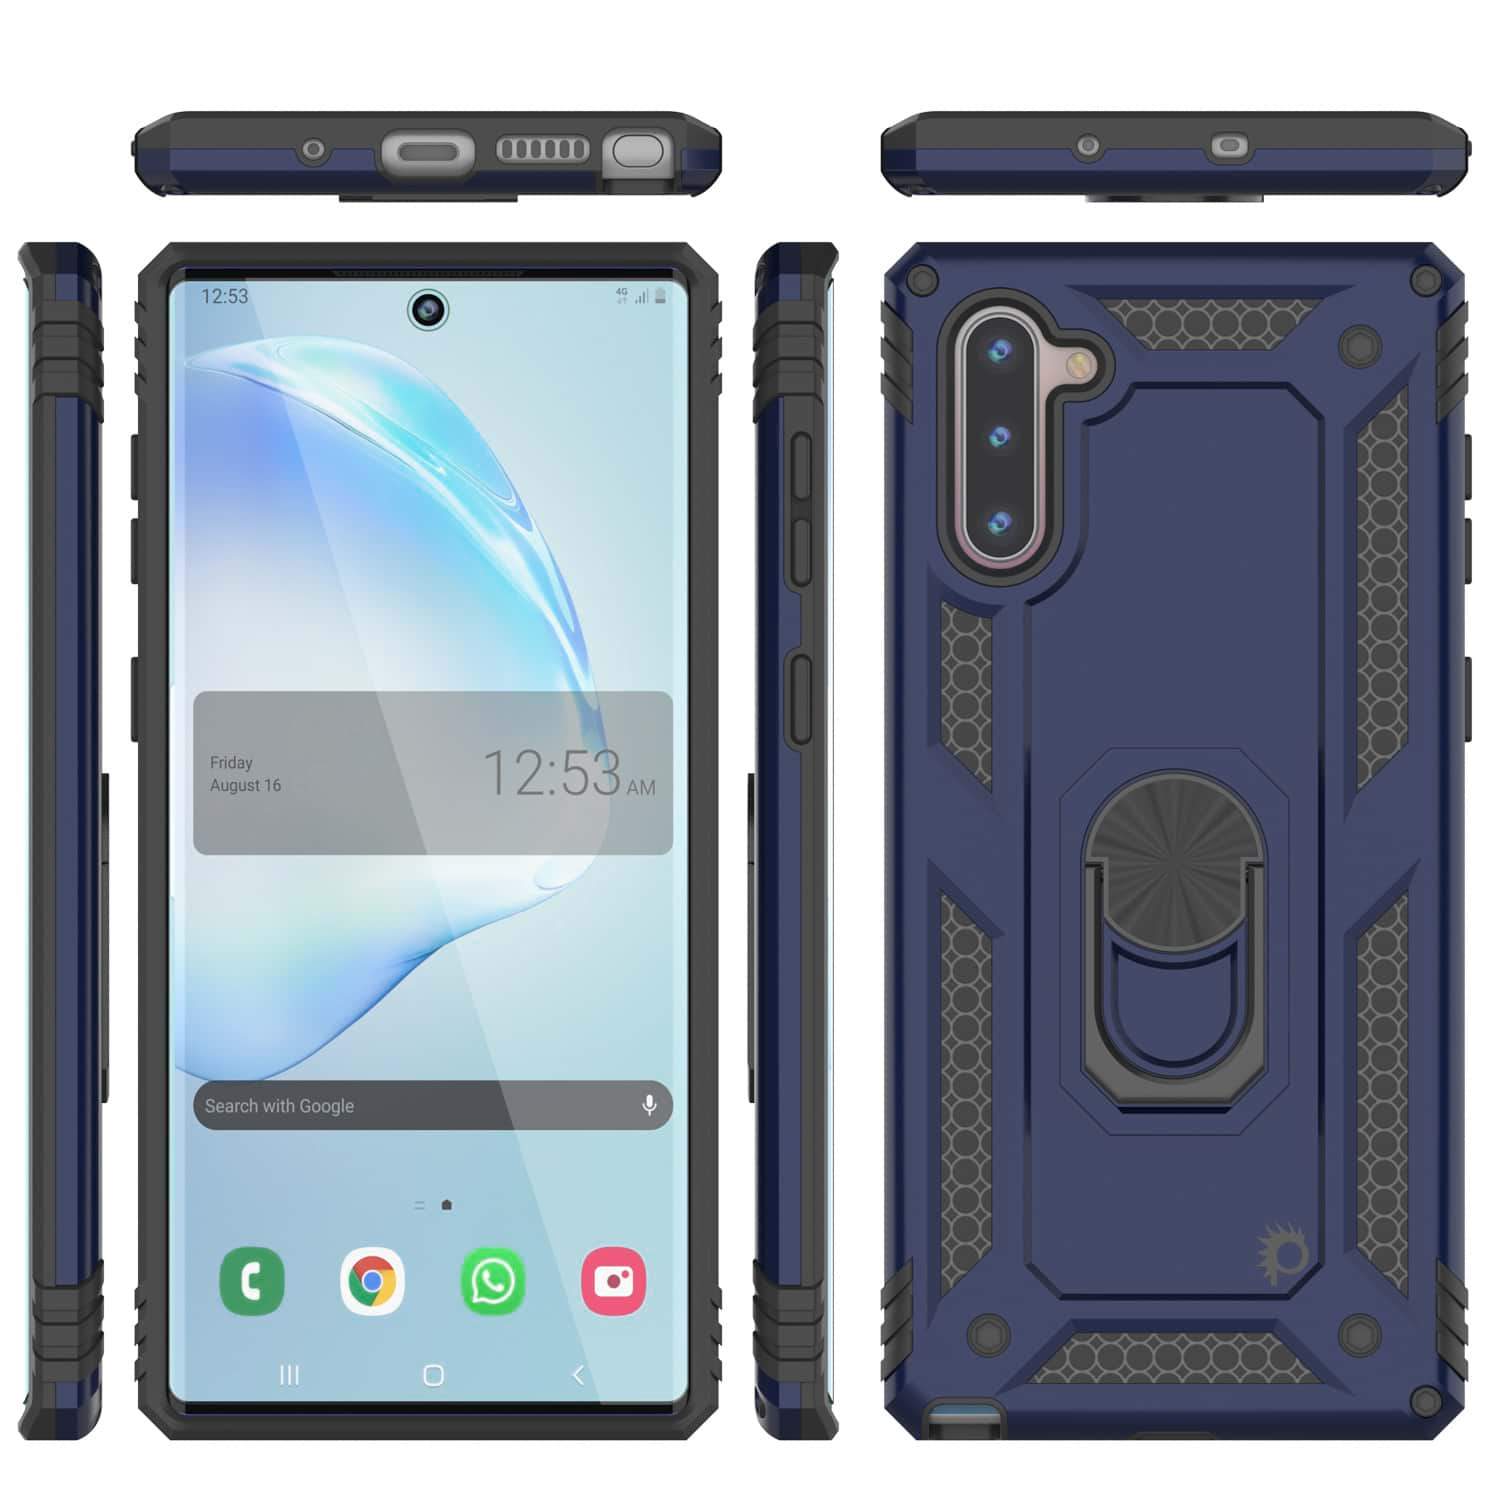 Galaxy Note 10 Punkcase Armor Military Case Navy-Blue